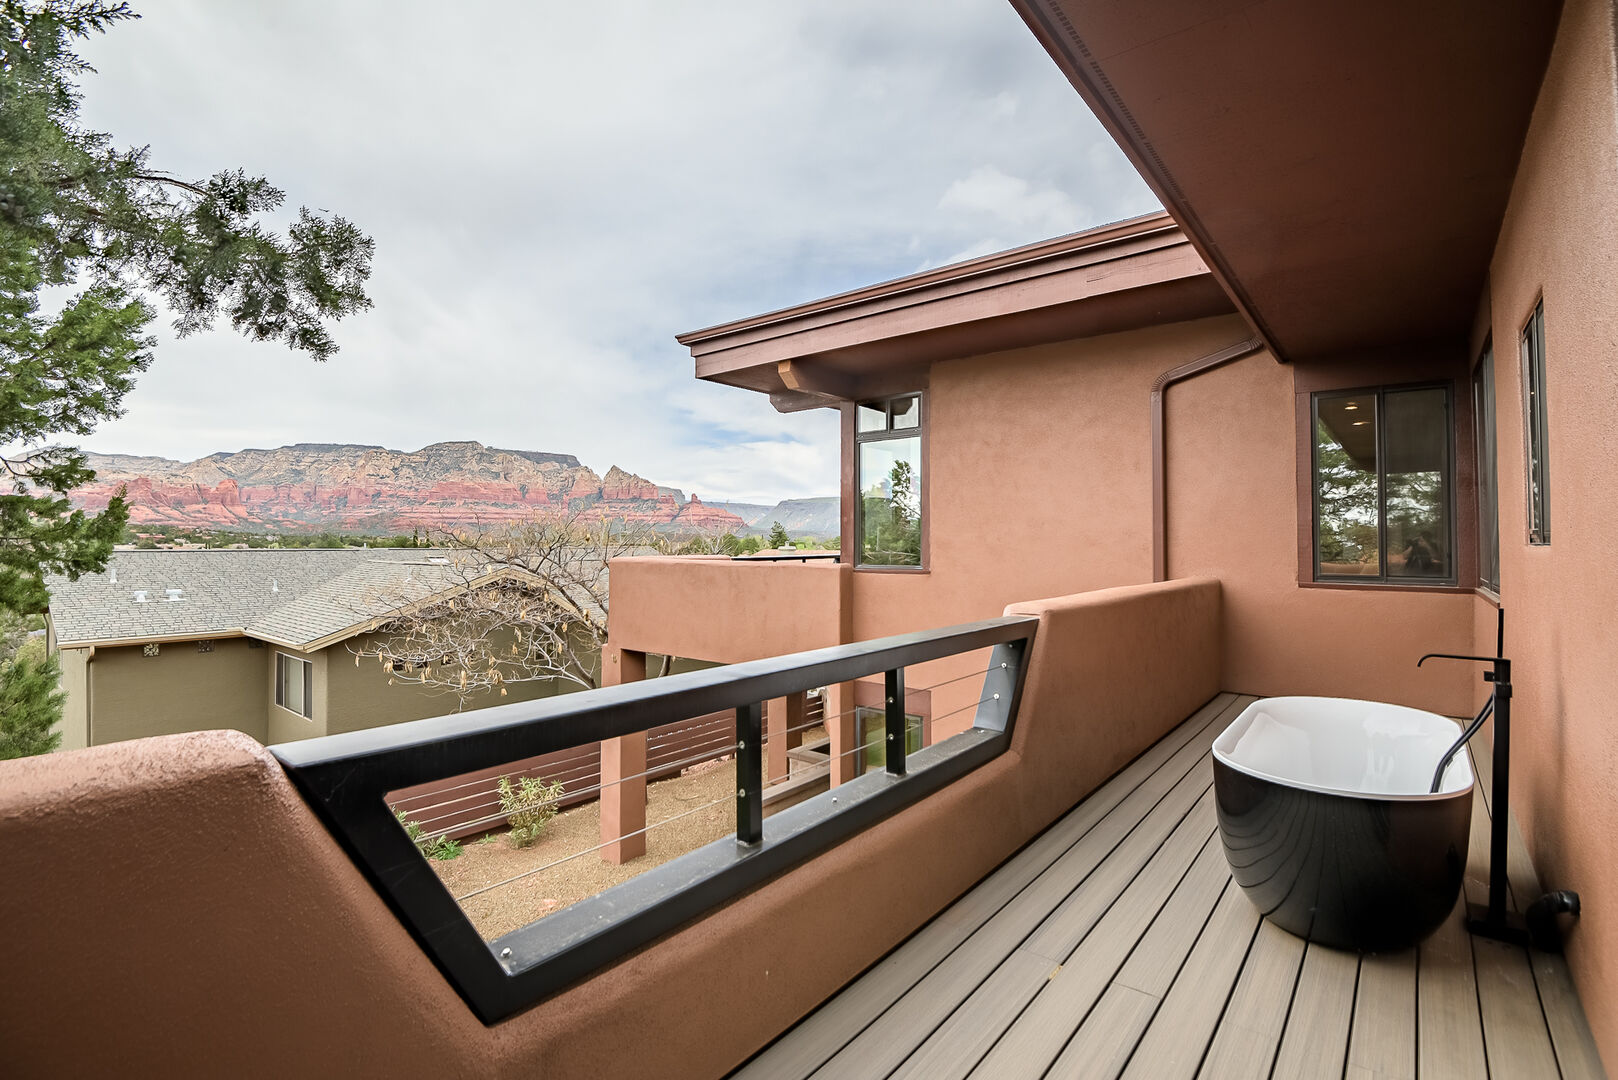 Enjoy a Bath on the Private Master Bedroom Balcony!